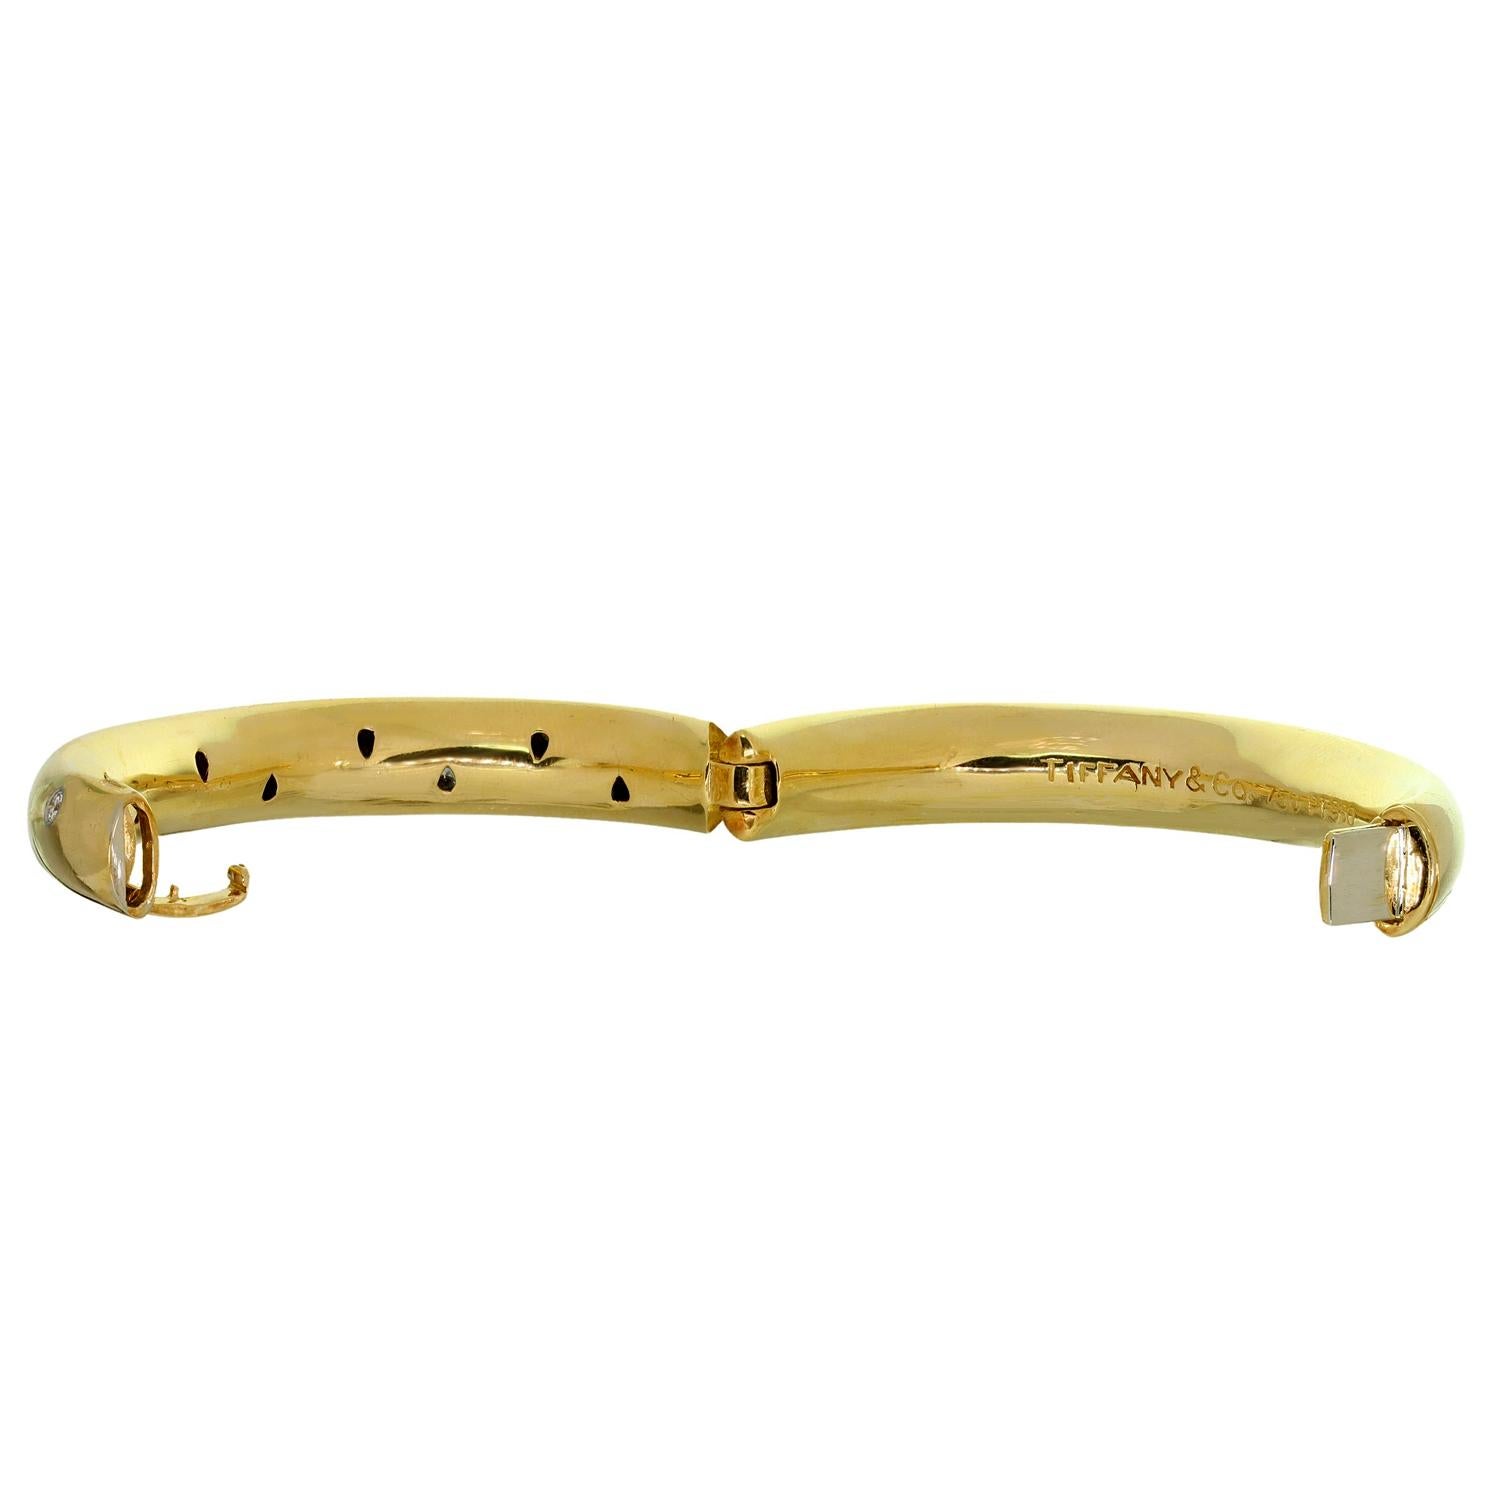 This gorgeous Tiffany & Co. small model bangle bracelet from the classic Etoile collection inspired by starry skies is crafted in 18k yellow gold with 950 platinum accents and set with 10 brilliant-cut round E-F VVS2-VS1 diamonds weighing an